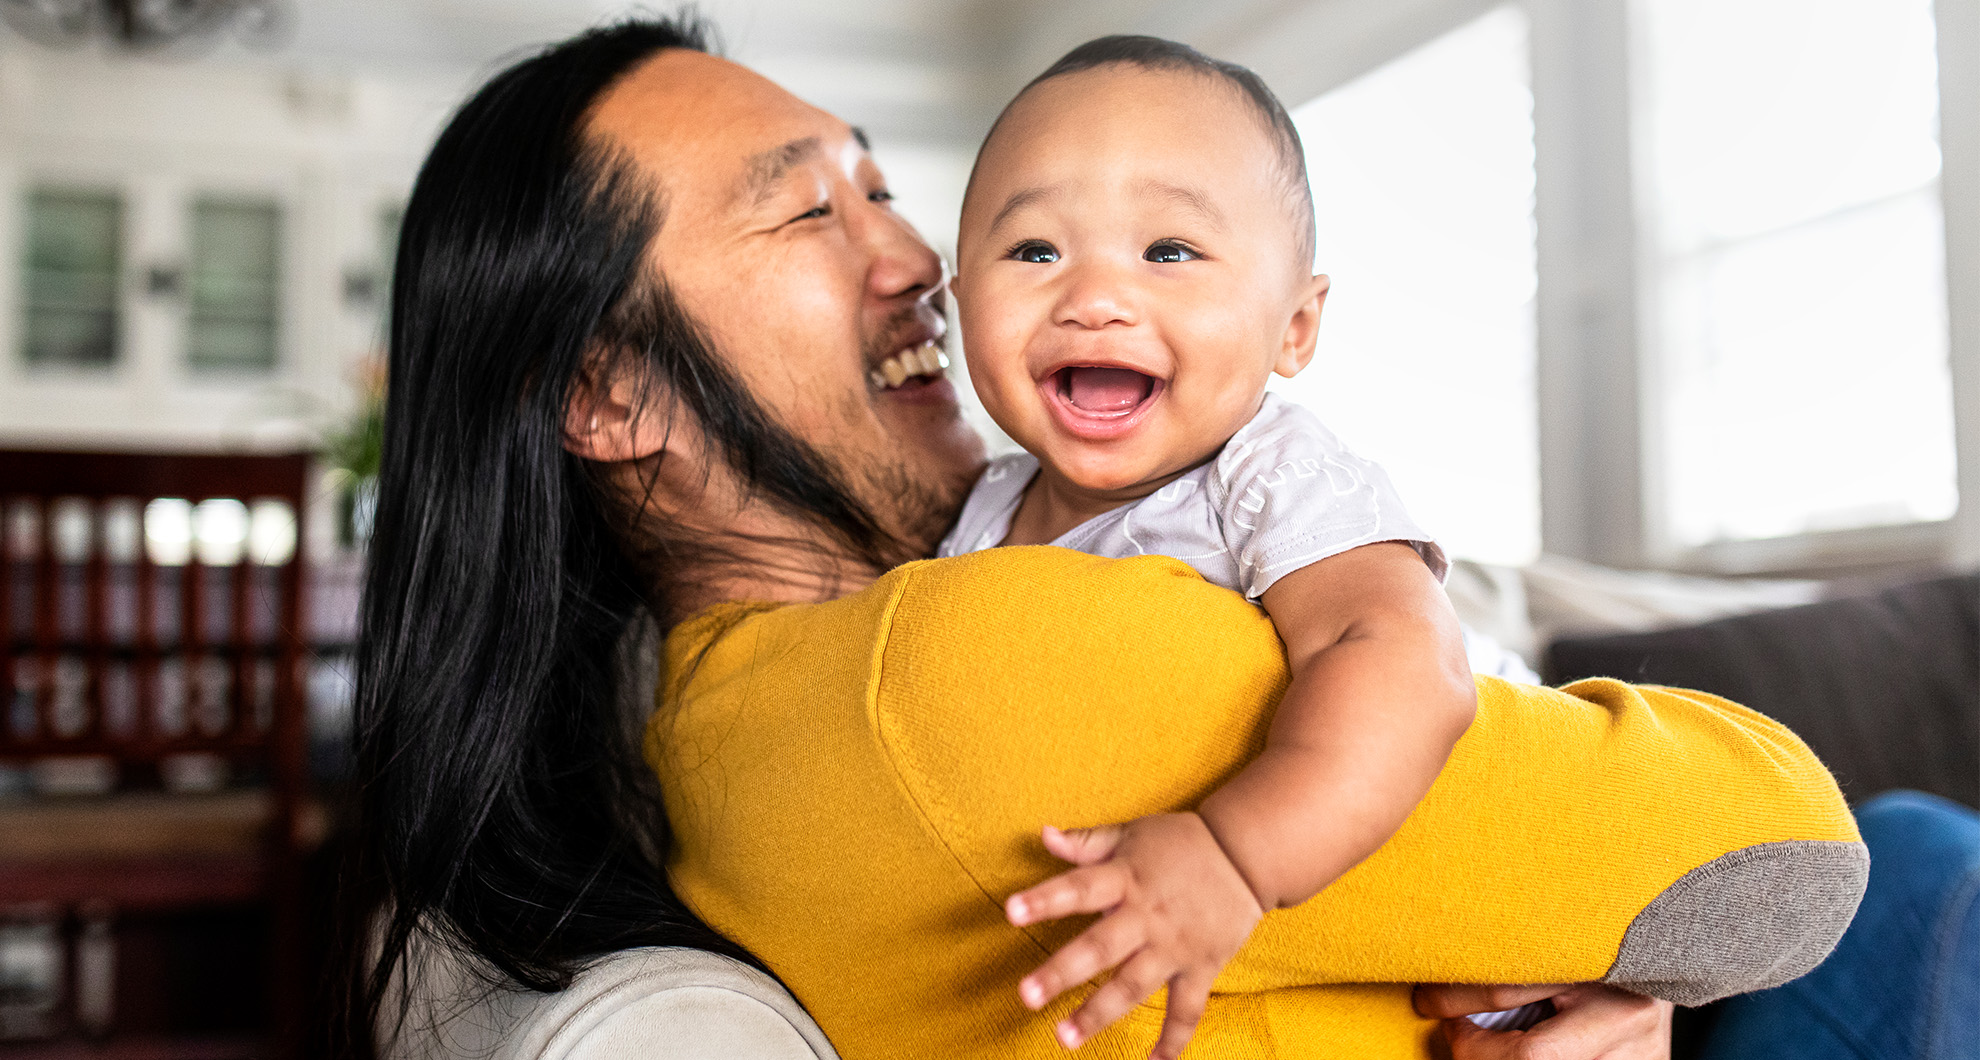 <p>Advertisements directed toward dads now portray fathers as actively involved in parenting. Credit: Shutterstock</p>